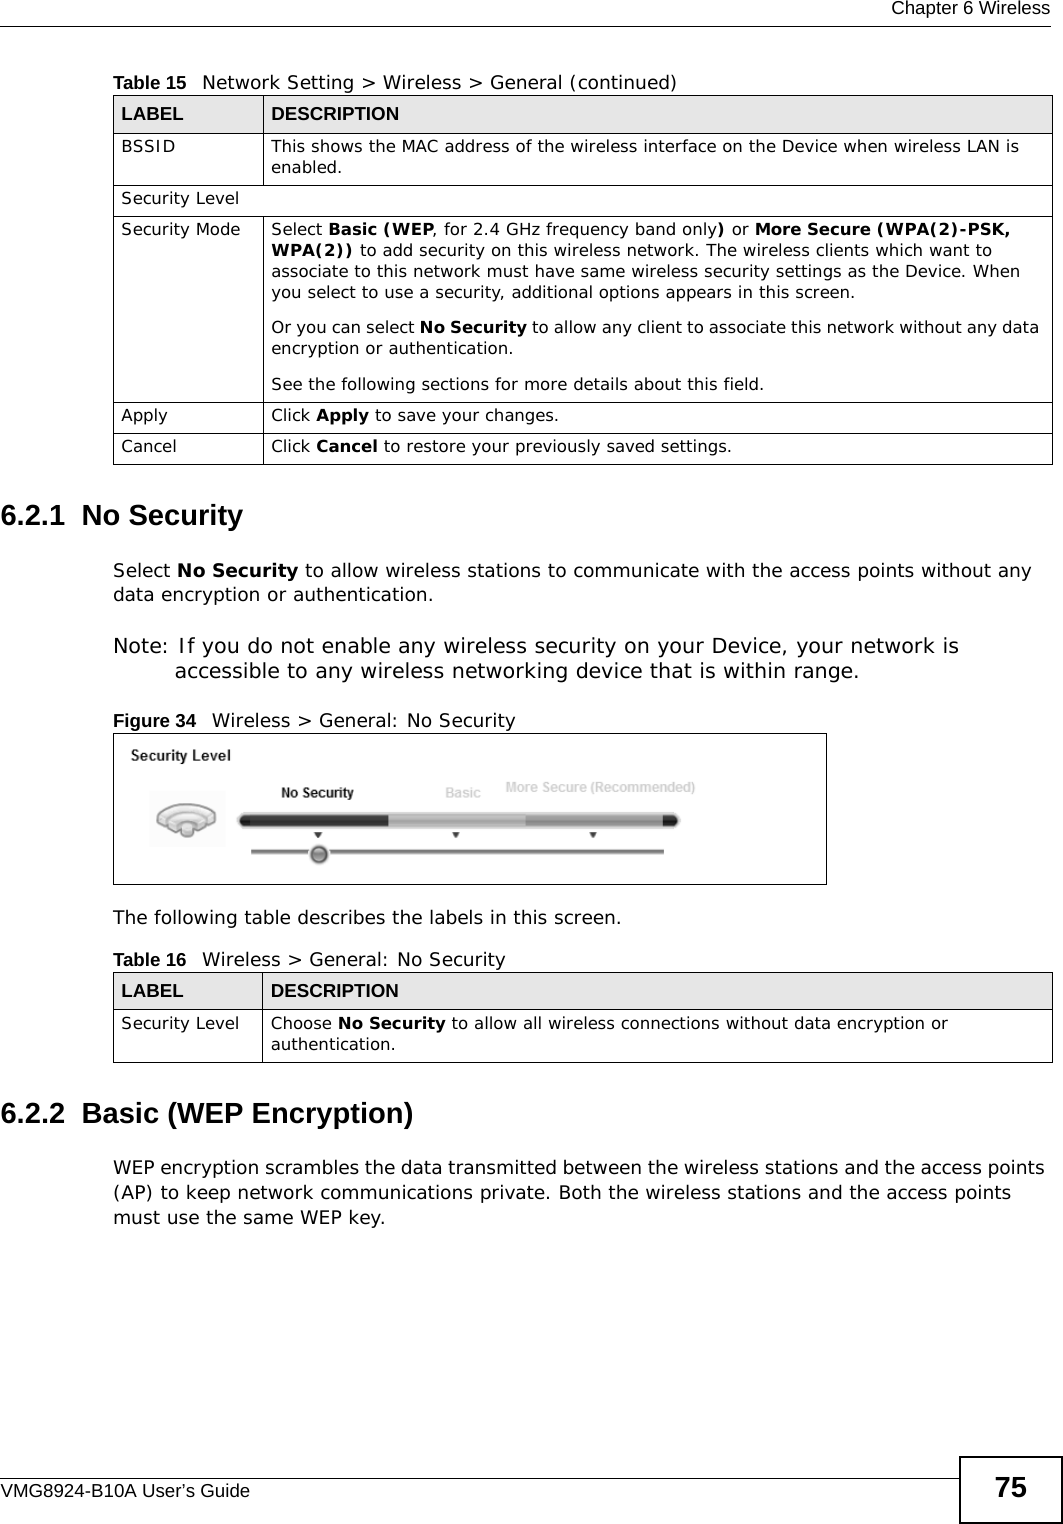  Chapter 6 WirelessVMG8924-B10A User’s Guide 756.2.1  No SecuritySelect No Security to allow wireless stations to communicate with the access points without any data encryption or authentication.Note: If you do not enable any wireless security on your Device, your network is accessible to any wireless networking device that is within range.Figure 34   Wireless &gt; General: No SecurityThe following table describes the labels in this screen.6.2.2  Basic (WEP Encryption)WEP encryption scrambles the data transmitted between the wireless stations and the access points (AP) to keep network communications private. Both the wireless stations and the access points must use the same WEP key.BSSID This shows the MAC address of the wireless interface on the Device when wireless LAN is enabled.Security LevelSecurity Mode Select Basic (WEP, for 2.4 GHz frequency band only) or More Secure (WPA(2)-PSK, WPA(2)) to add security on this wireless network. The wireless clients which want to associate to this network must have same wireless security settings as the Device. When you select to use a security, additional options appears in this screen. Or you can select No Security to allow any client to associate this network without any data encryption or authentication.See the following sections for more details about this field.Apply Click Apply to save your changes.Cancel Click Cancel to restore your previously saved settings.Table 15   Network Setting &gt; Wireless &gt; General (continued)LABEL DESCRIPTIONTable 16   Wireless &gt; General: No SecurityLABEL DESCRIPTIONSecurity Level Choose No Security to allow all wireless connections without data encryption or authentication.